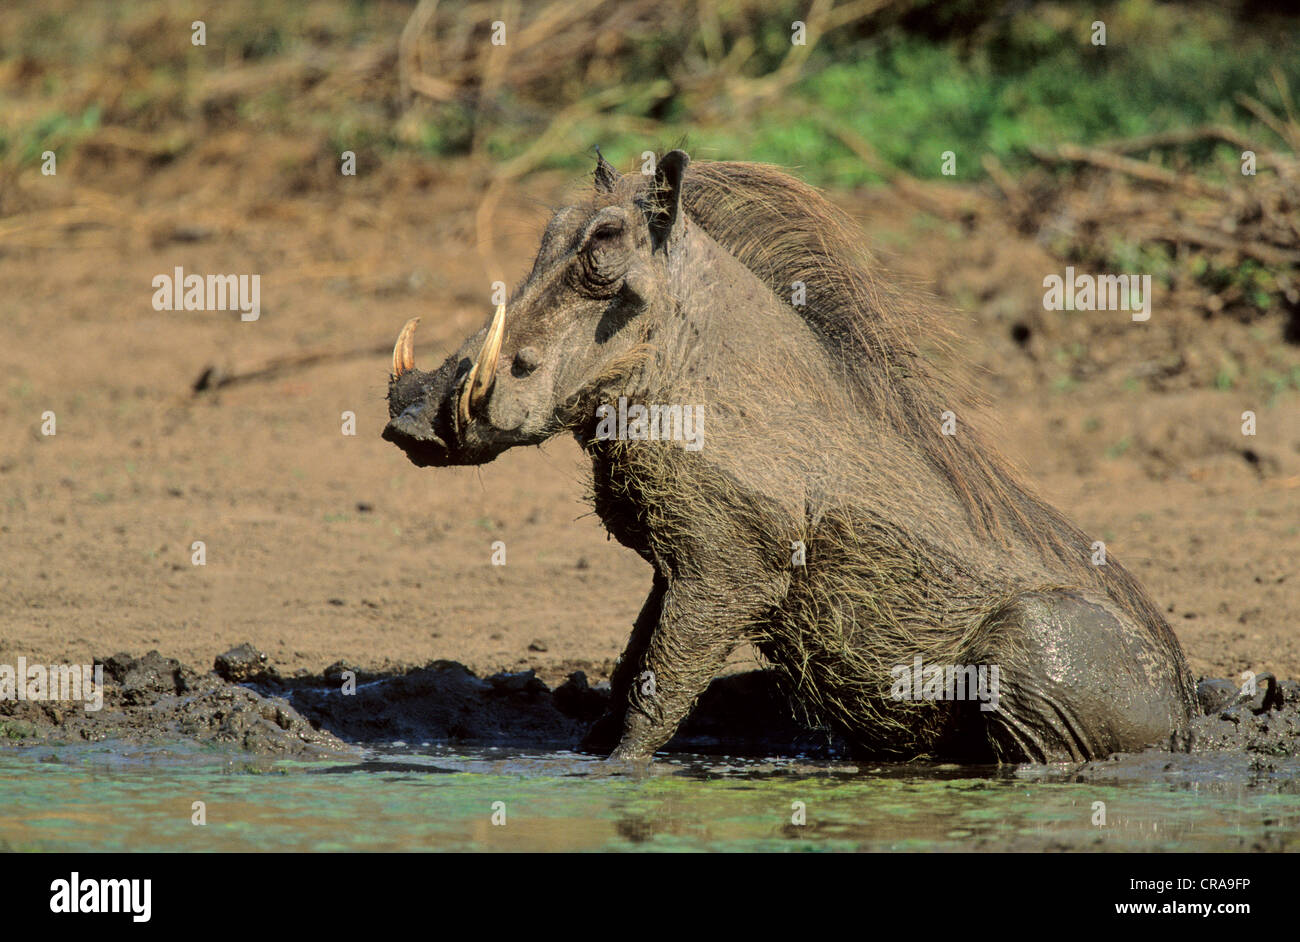 Deserto warthog (Phacochoerus aethiopicus), wallowing, Kruger National Park, Sud Africa e Africa Foto Stock